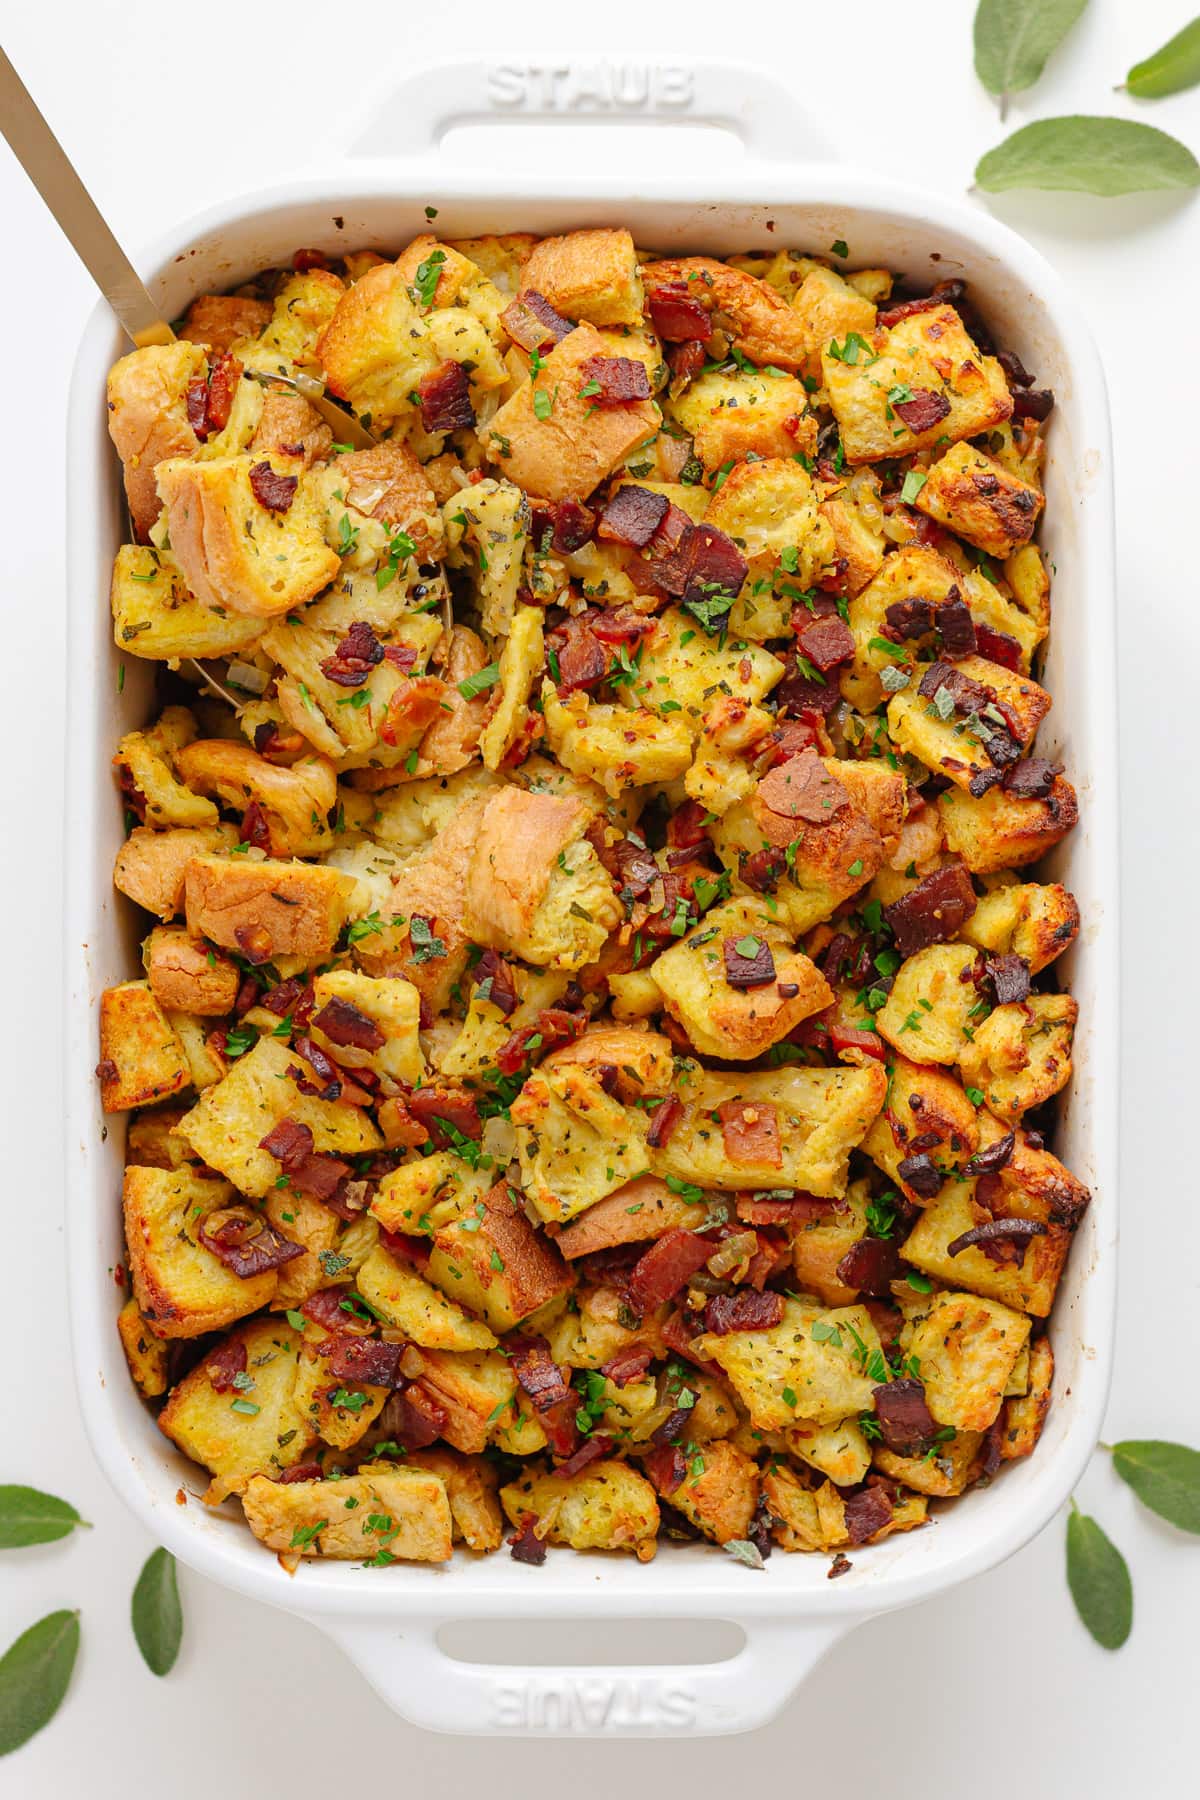 Bacon, sage and onion stuffing in a white casserole dish.